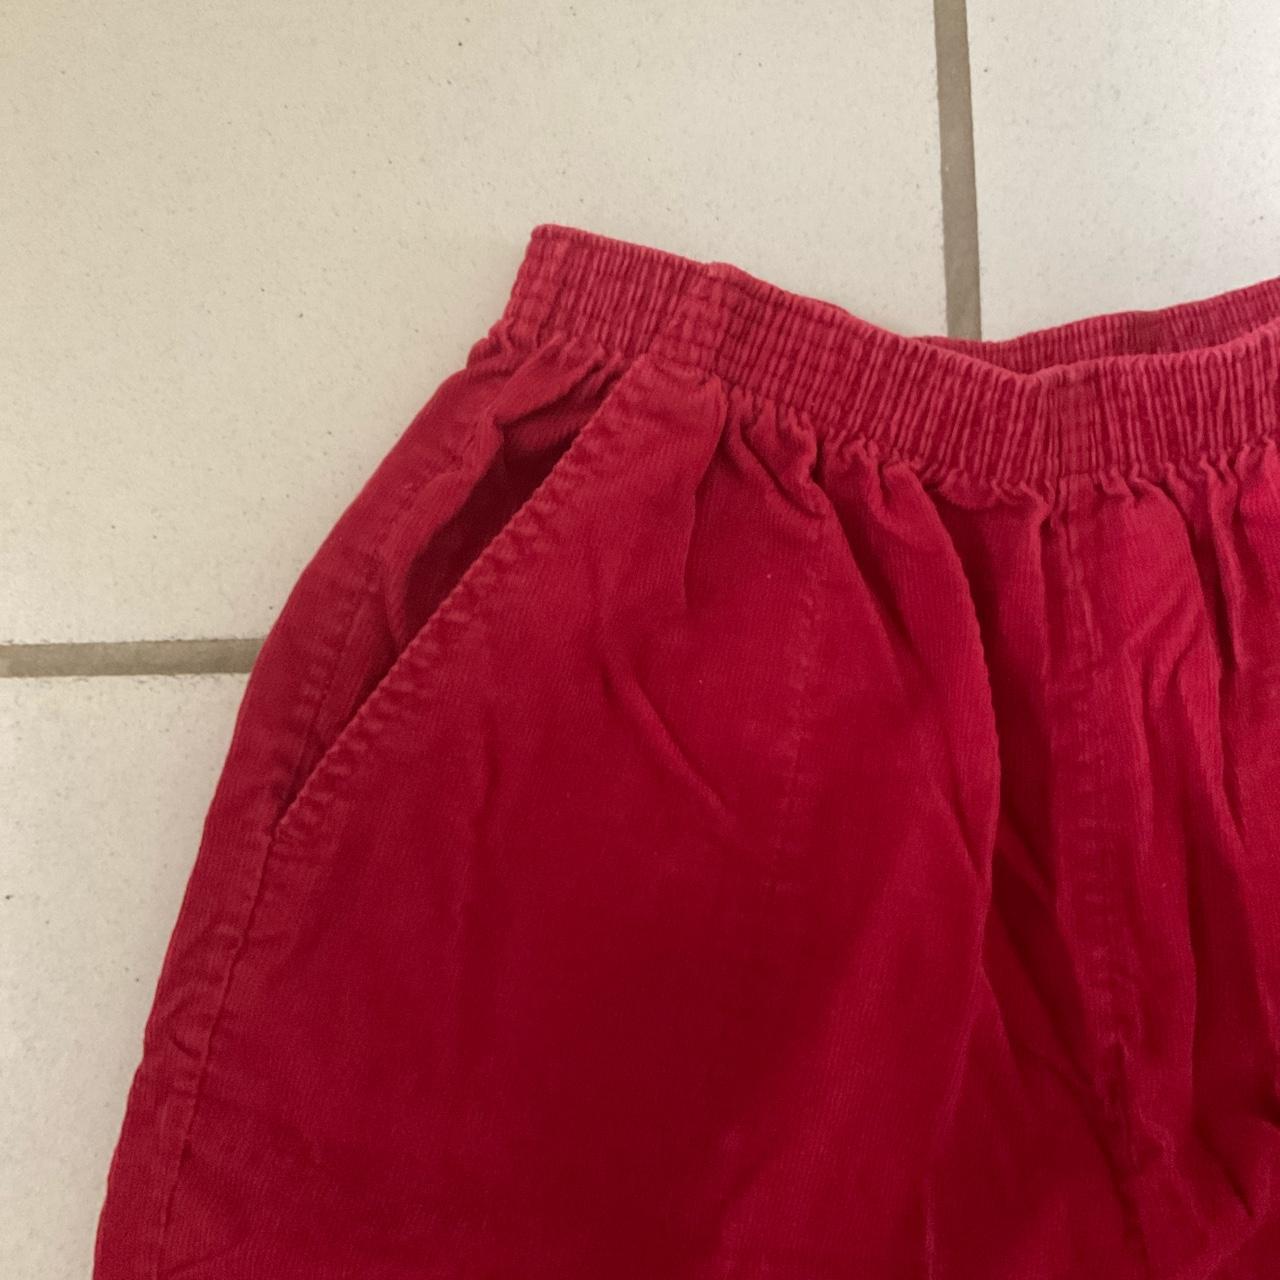 Product Image 2 - Red oversized skater pants with